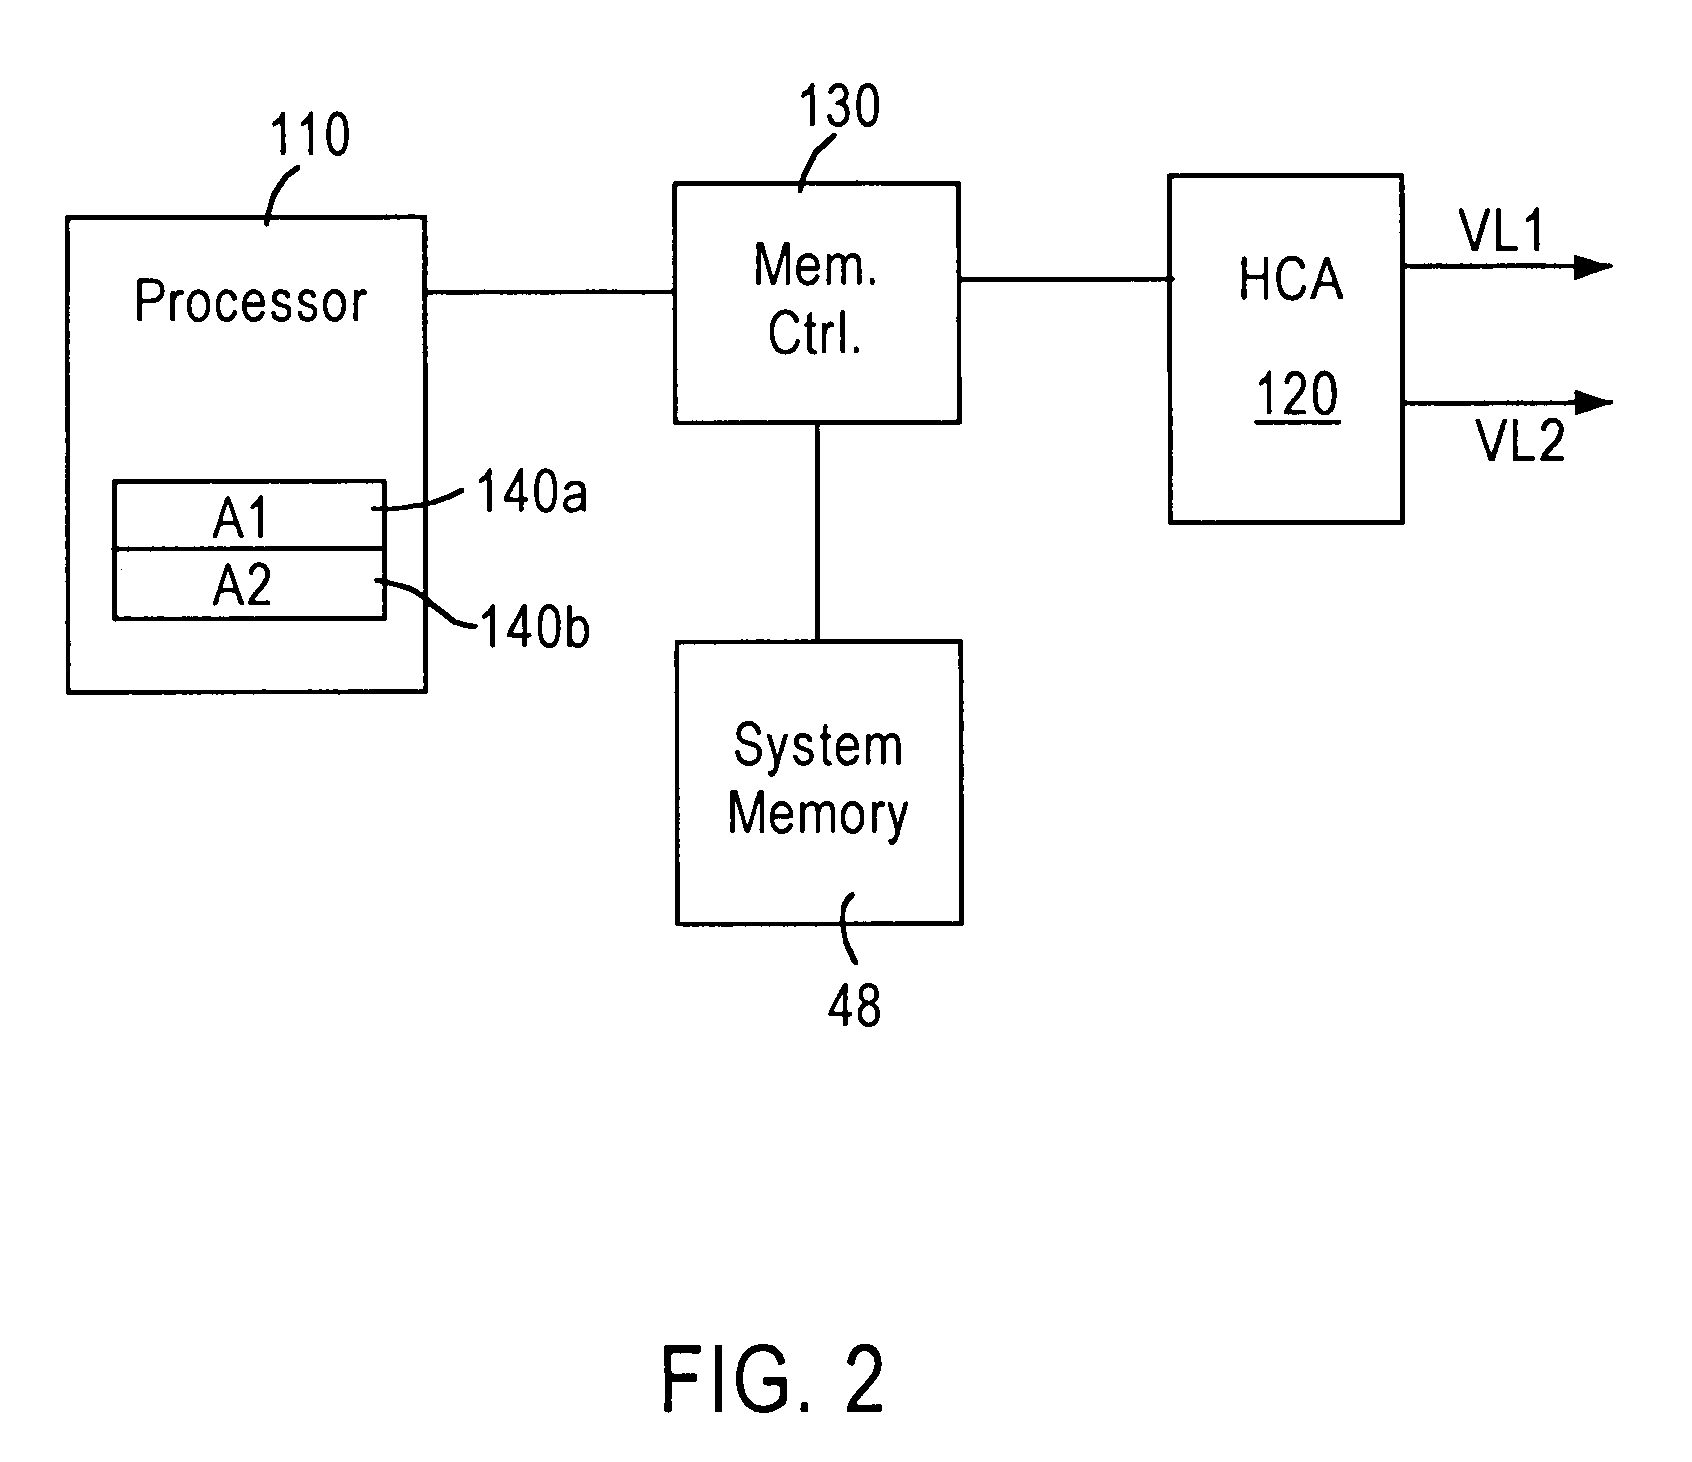 Arrangement for reducing application execution based on a determined lack of flow control credits for a network channel